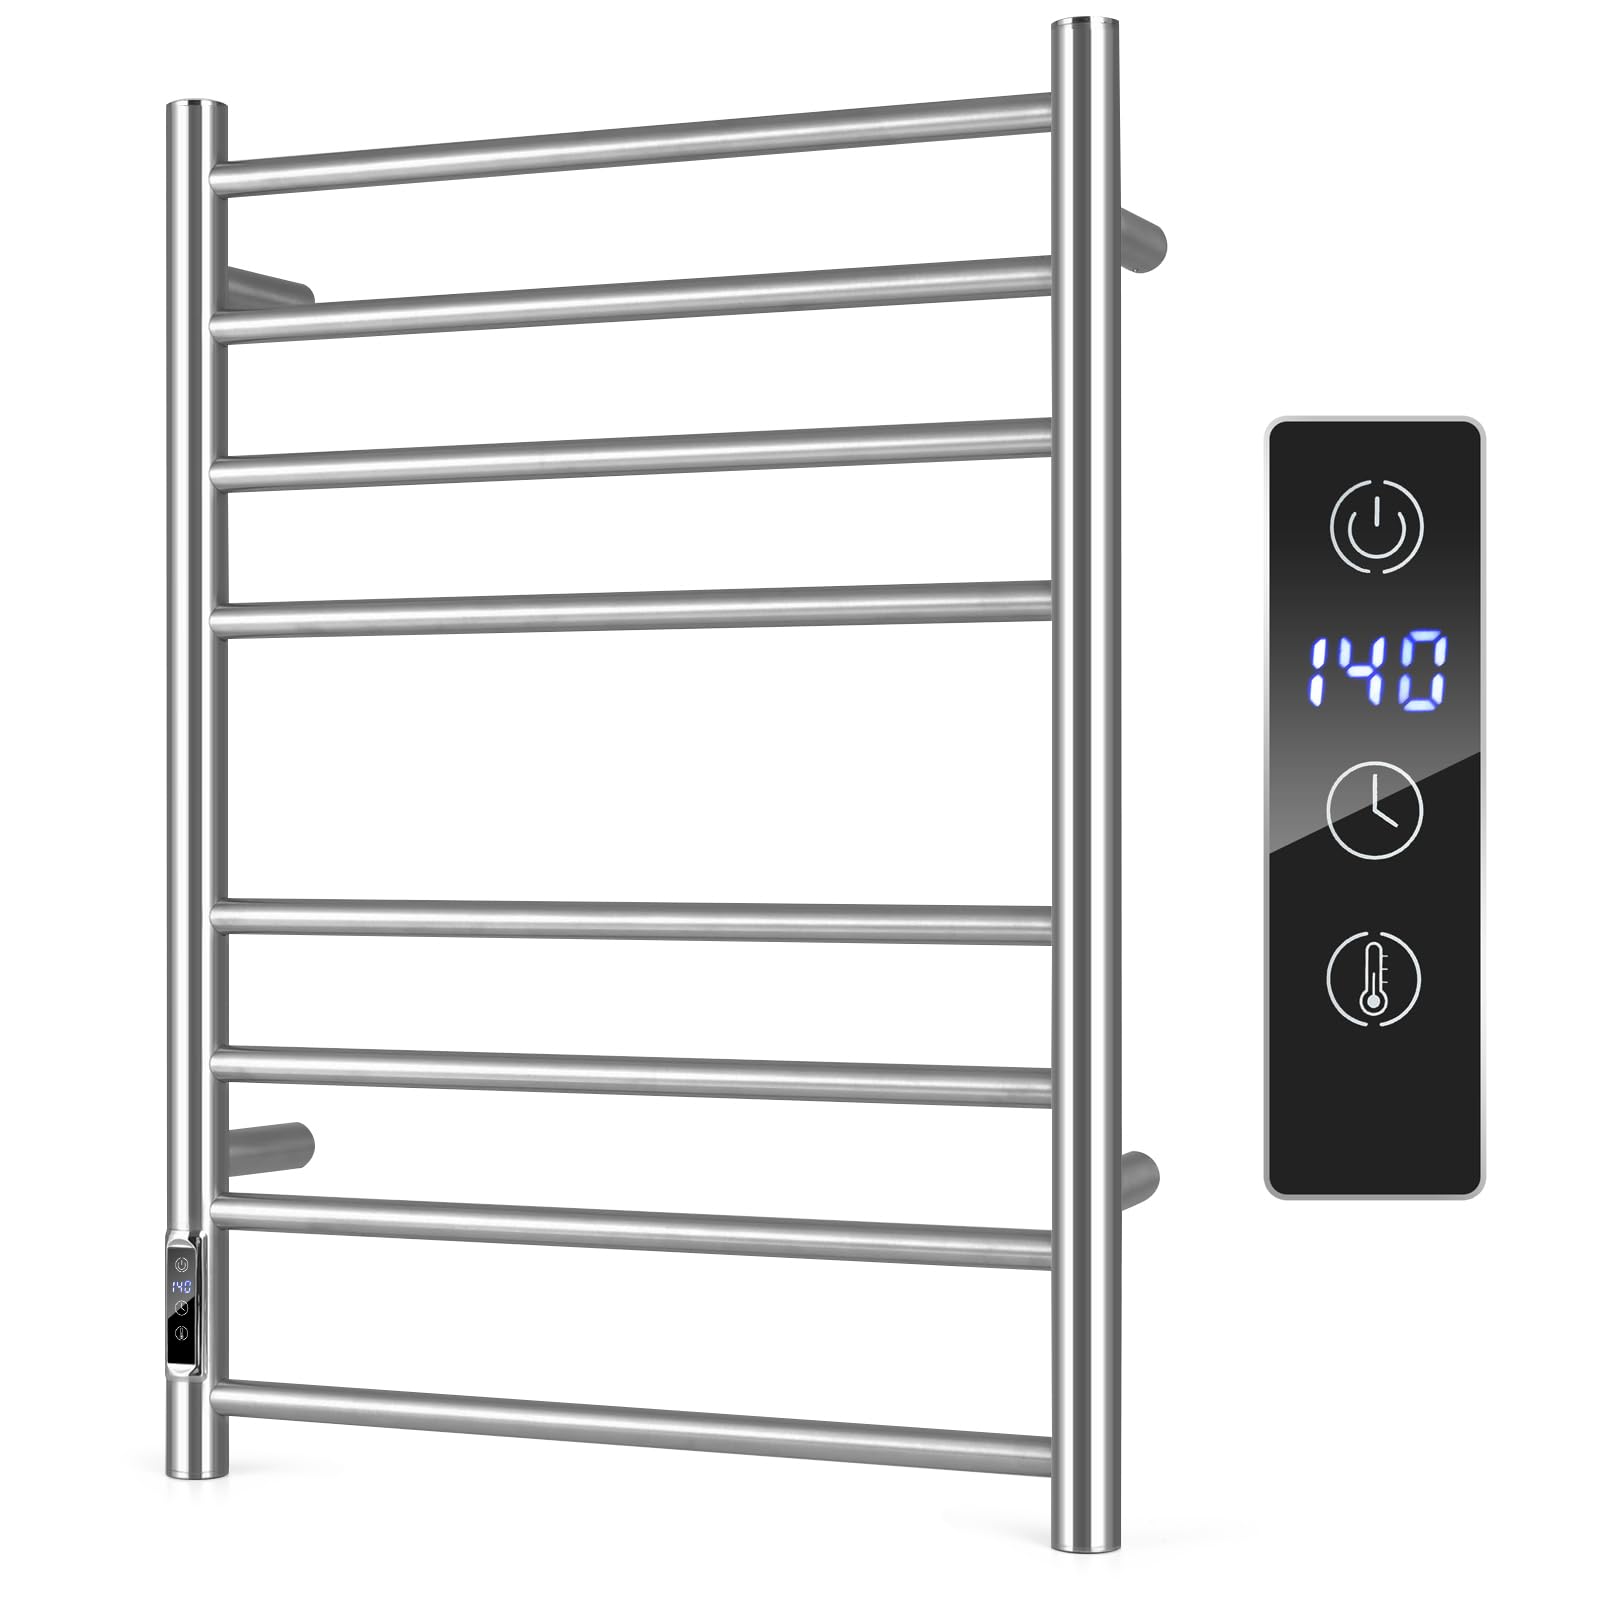  Tangkula Towel Warmer, Bathroom 10 Bars Heated Stainless Steel  Towel Rack with 1-8 Hour Timer & 12-Level Adjustable Temperature, IP44  Waterproof Plug-in Wall Mounted Electric Drying Rack, Silver : Home 